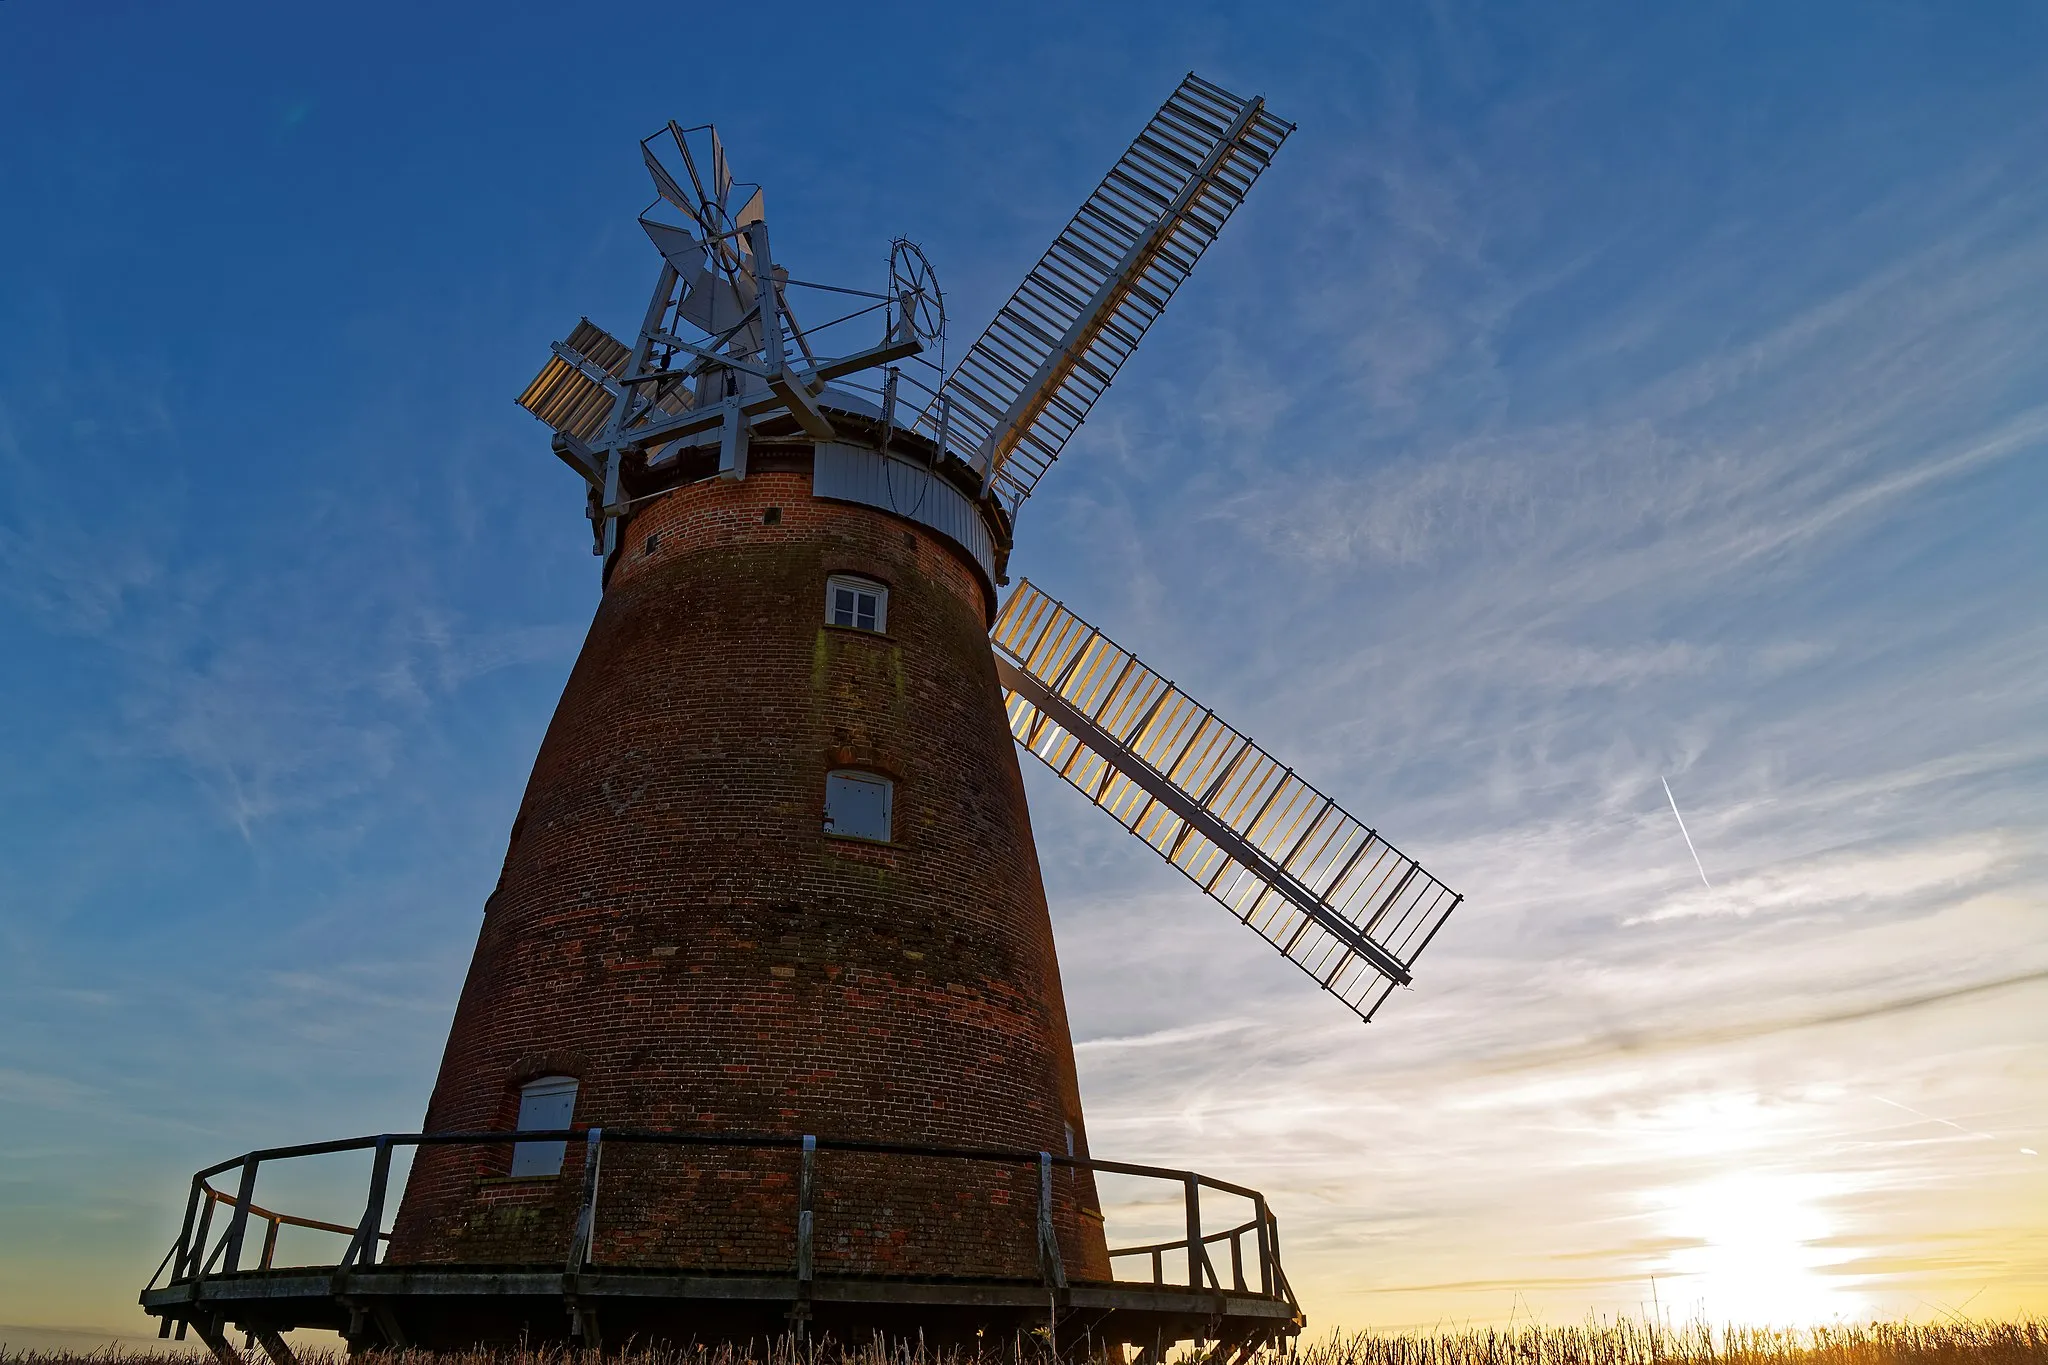 Photo showing: John Webb's windmill at Thaxted, Essex, England. Software: JPEG file optimized and/or cropped and/or spun with DxO OpticsPro 10 Elite and Adobe Photoshop CS2.